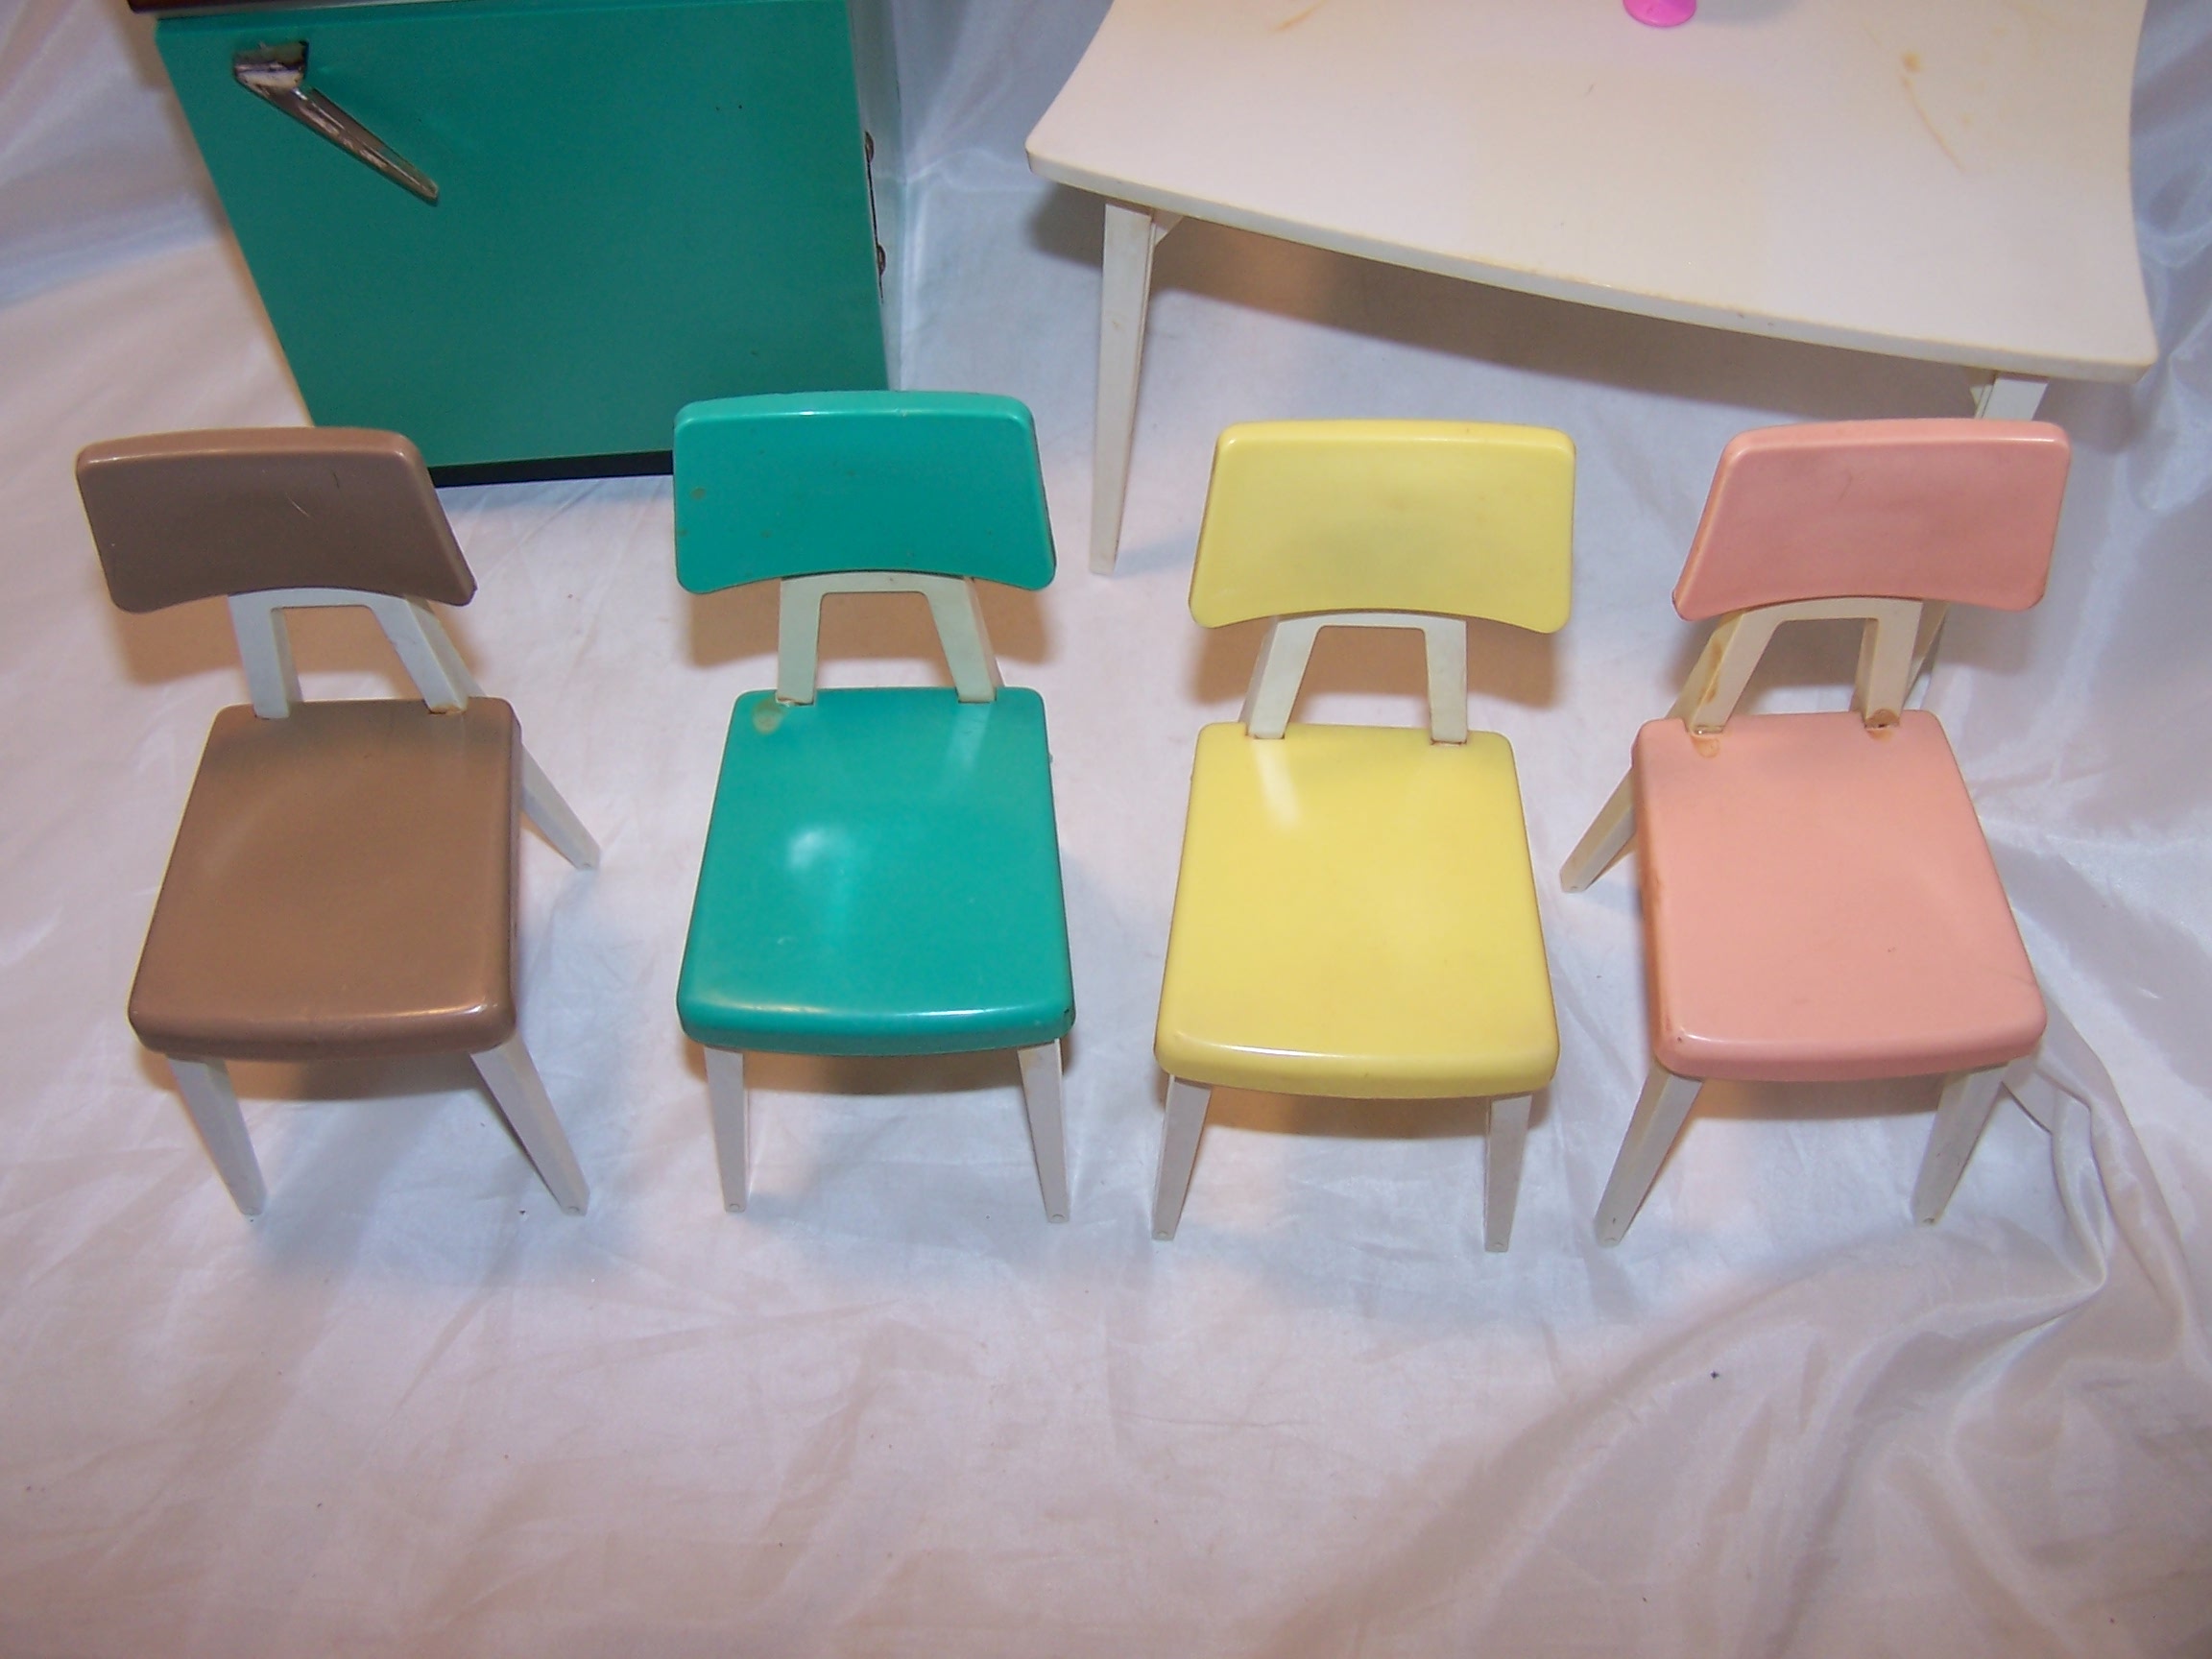 Four Barbie Chairs